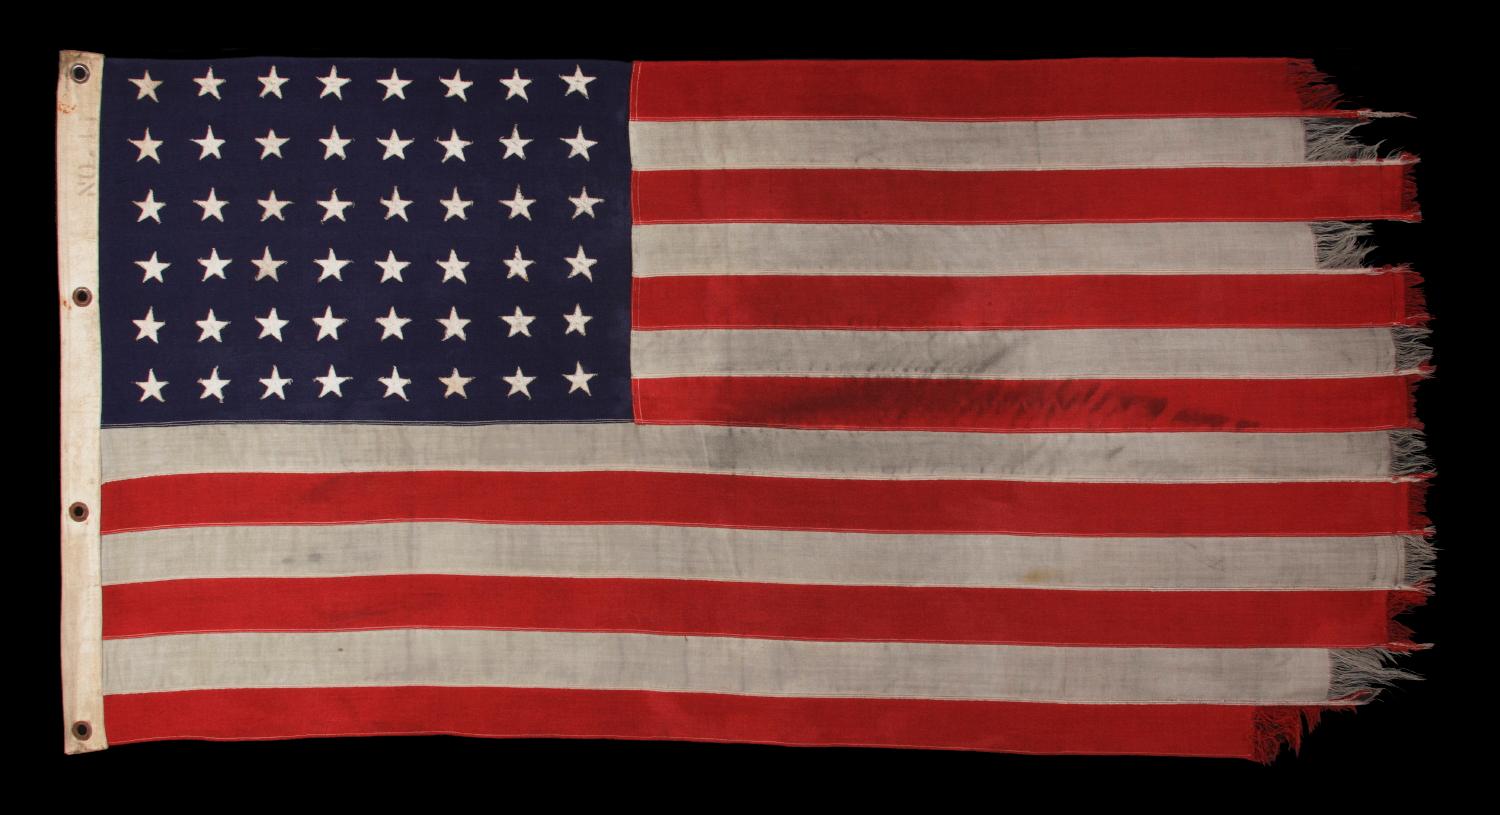 WWII VINTAGE ANTIQUE AMERICAN FLAG WITH 48 STARS AND ENDEARING WEAR FROM OBVIOUS LONG-TERM USE, A U.S. NAVY SMALL BOAT ENSIGN MARKED 